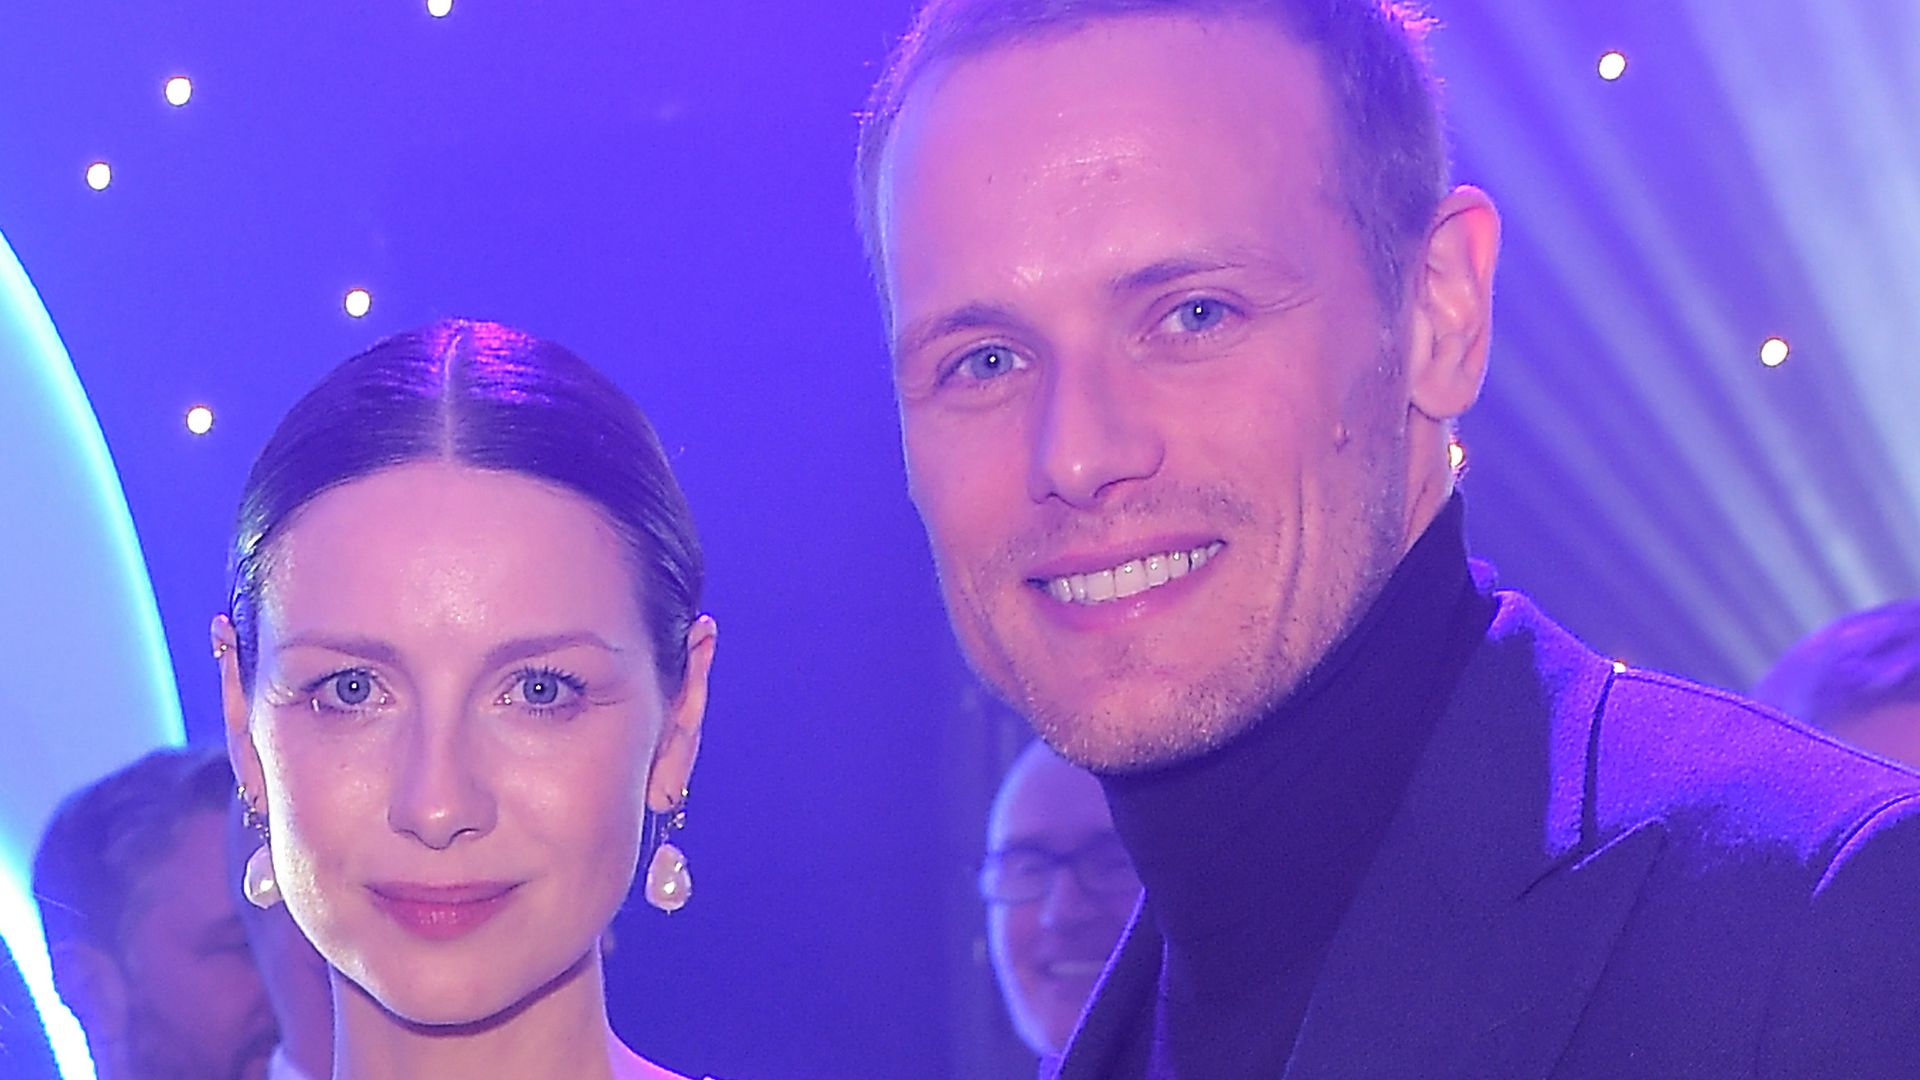 Sam Heughan and Caitriona Balfe smiling at the camera